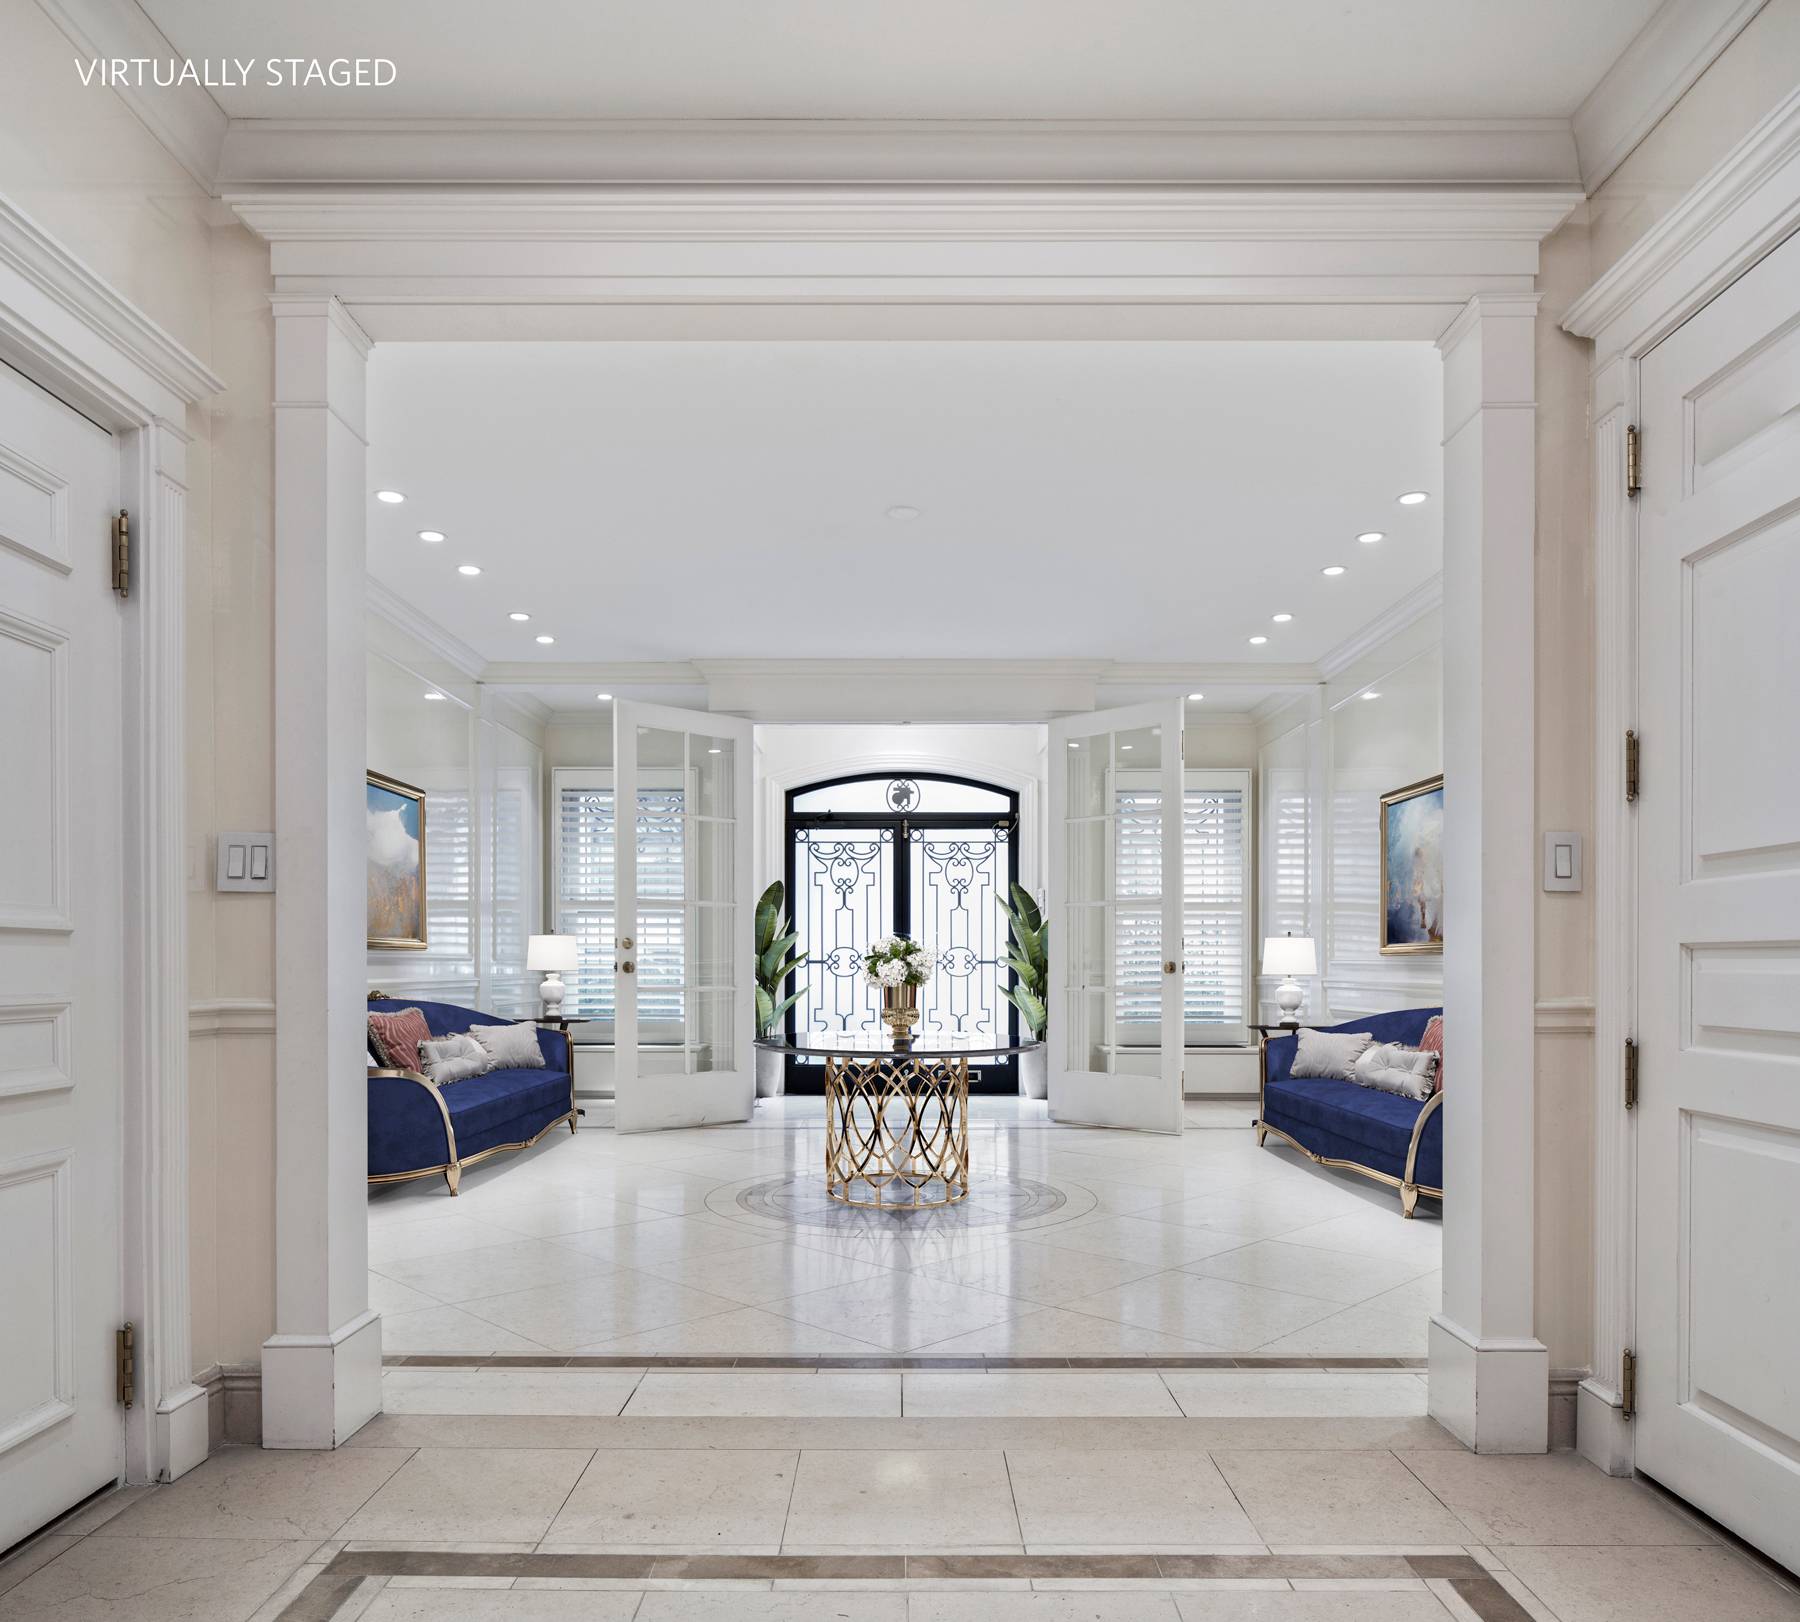 Located on a magnificent townhouse block directly off Fifth Avenue, Central Park and the Metropolitan Museum is an extraordinary opportunity to lease an exquisite fully renovated 5 story Beaux Arts ...